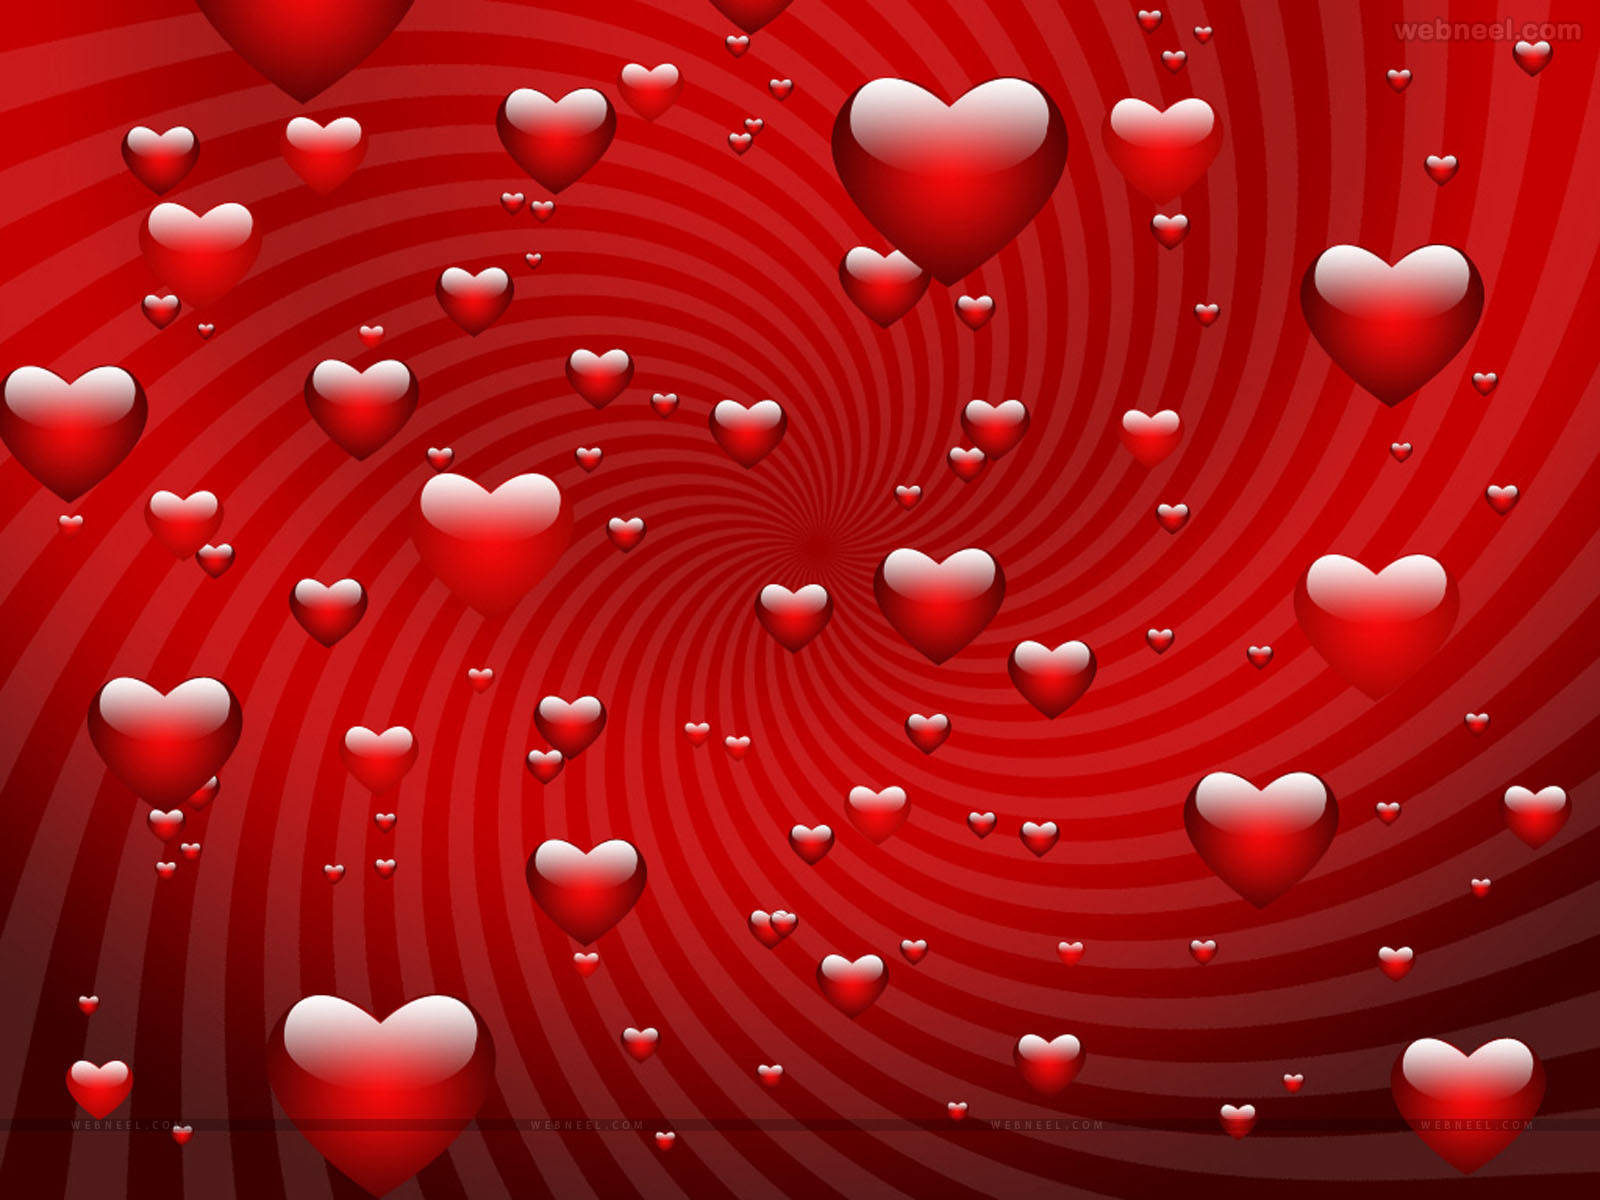 Celebrate Valentine's day by sharing the love Wallpaper